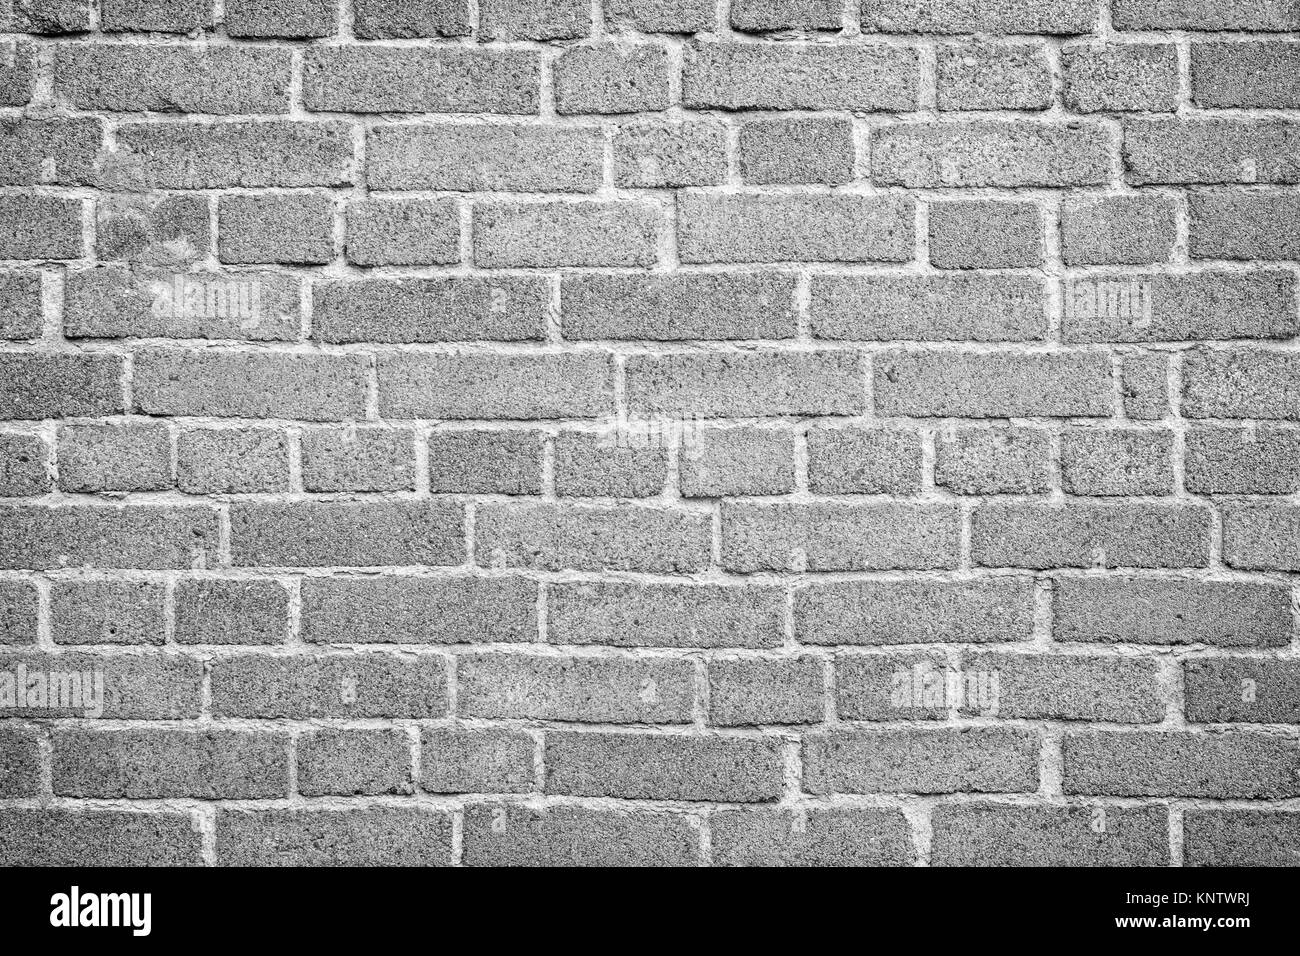 Brick wall texture background in black and white with vignetting. Stock Photo